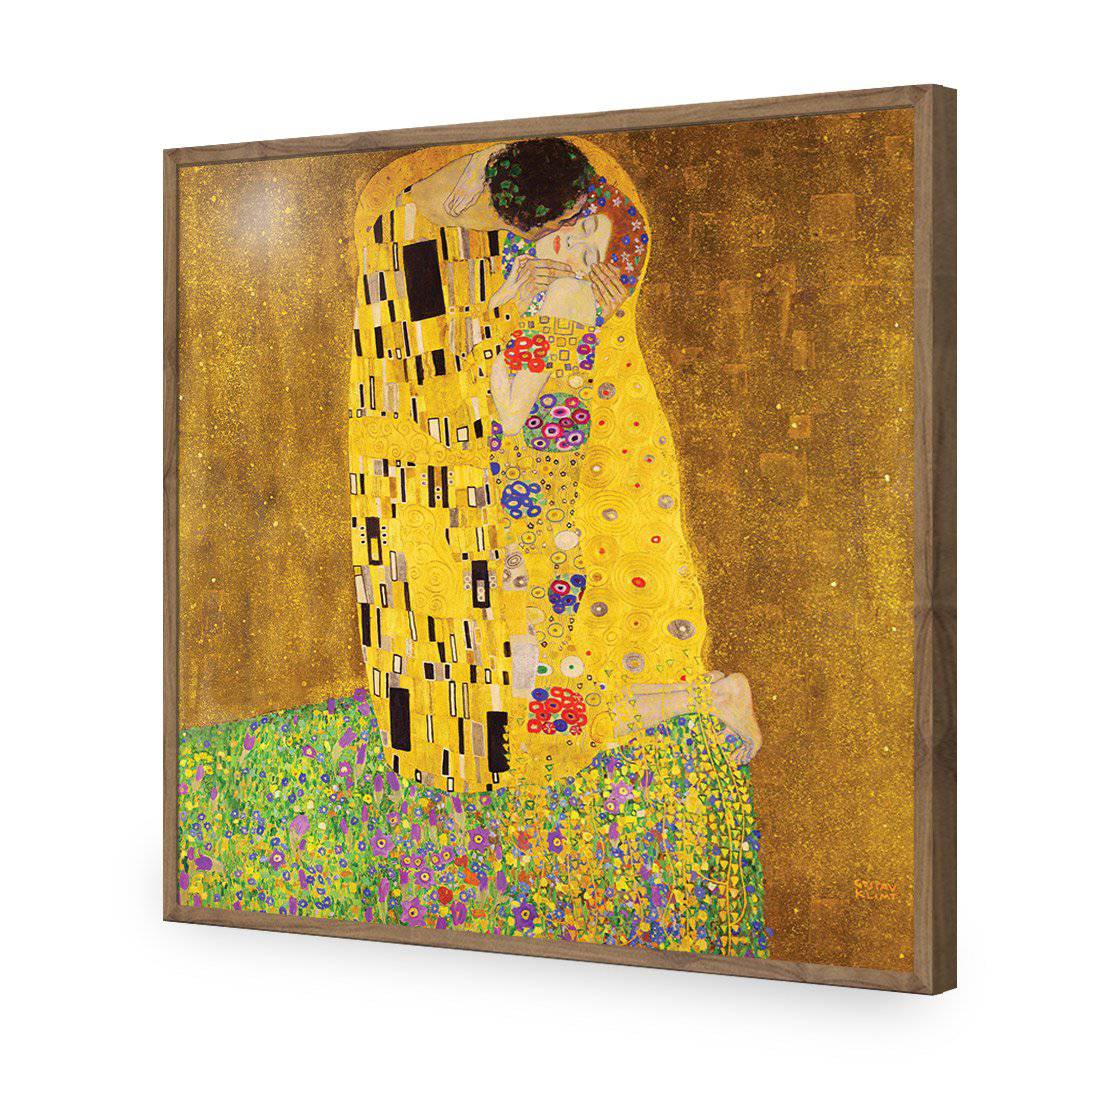 The Kiss, Square-Acrylic-Wall Art Design-Without Border-Acrylic - Natural Frame-37x37cm-Wall Art Designs